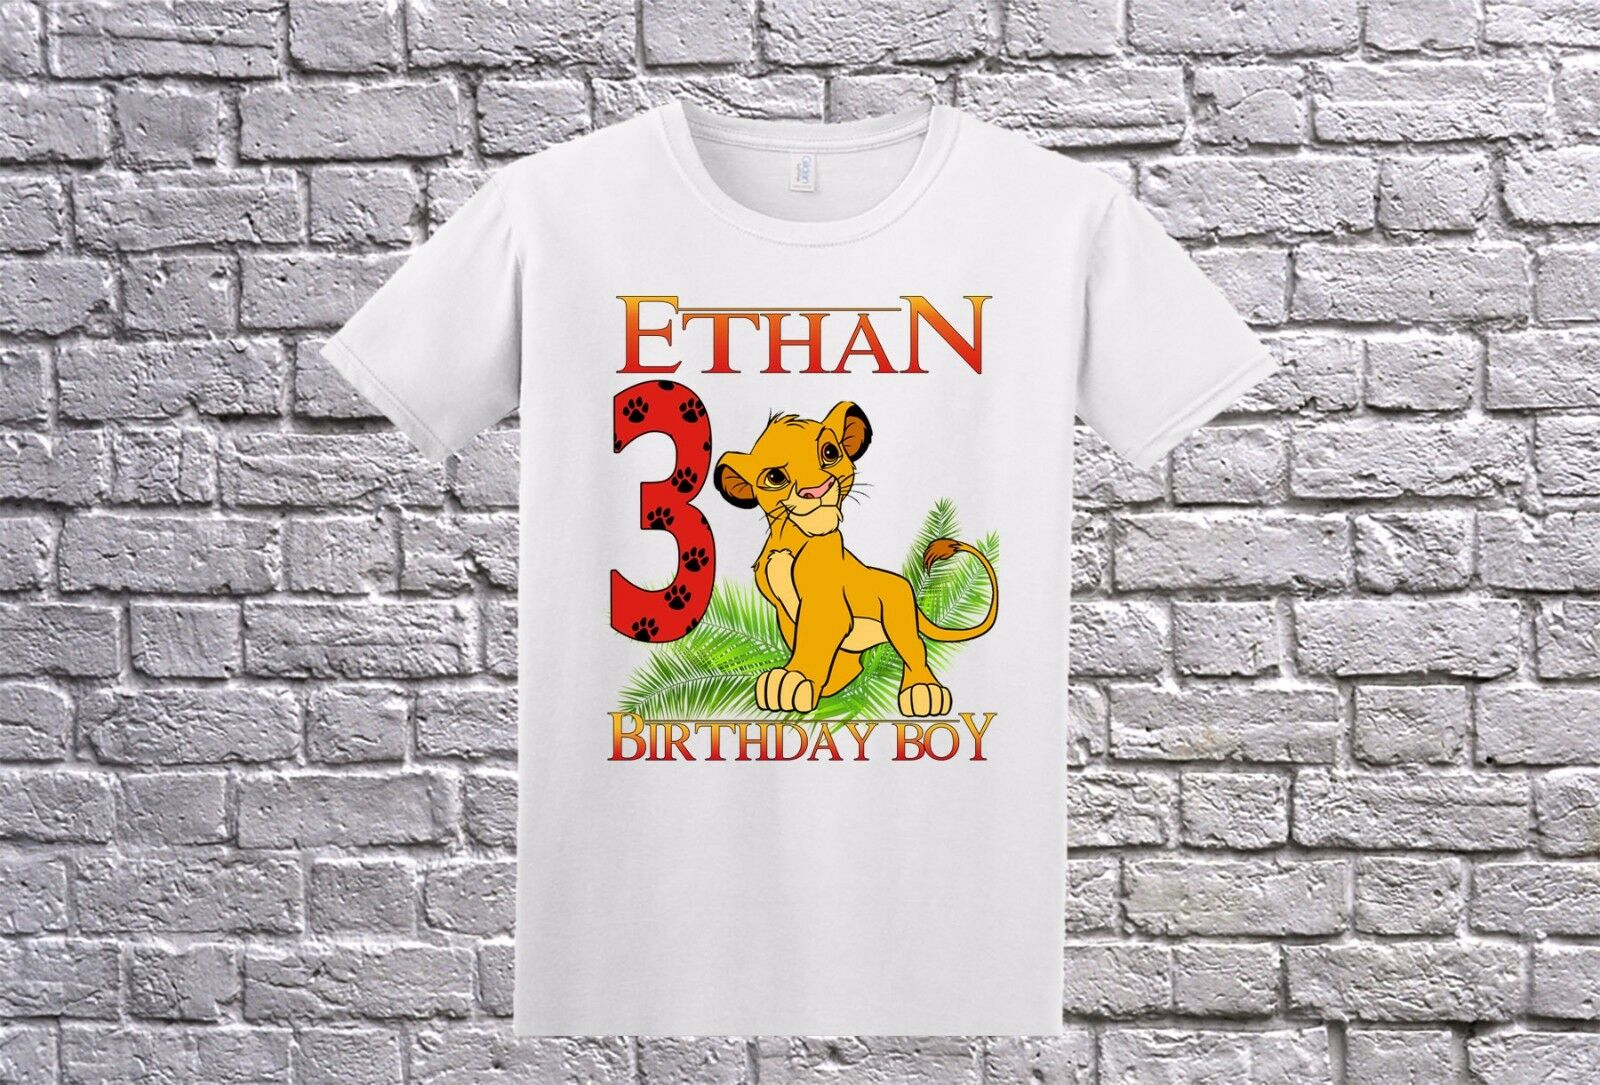 Lion King Birthday Family Matching T-Shirts Lion King Party Shirt Matching Family Outfits Gift, Customized with Any Name and Age